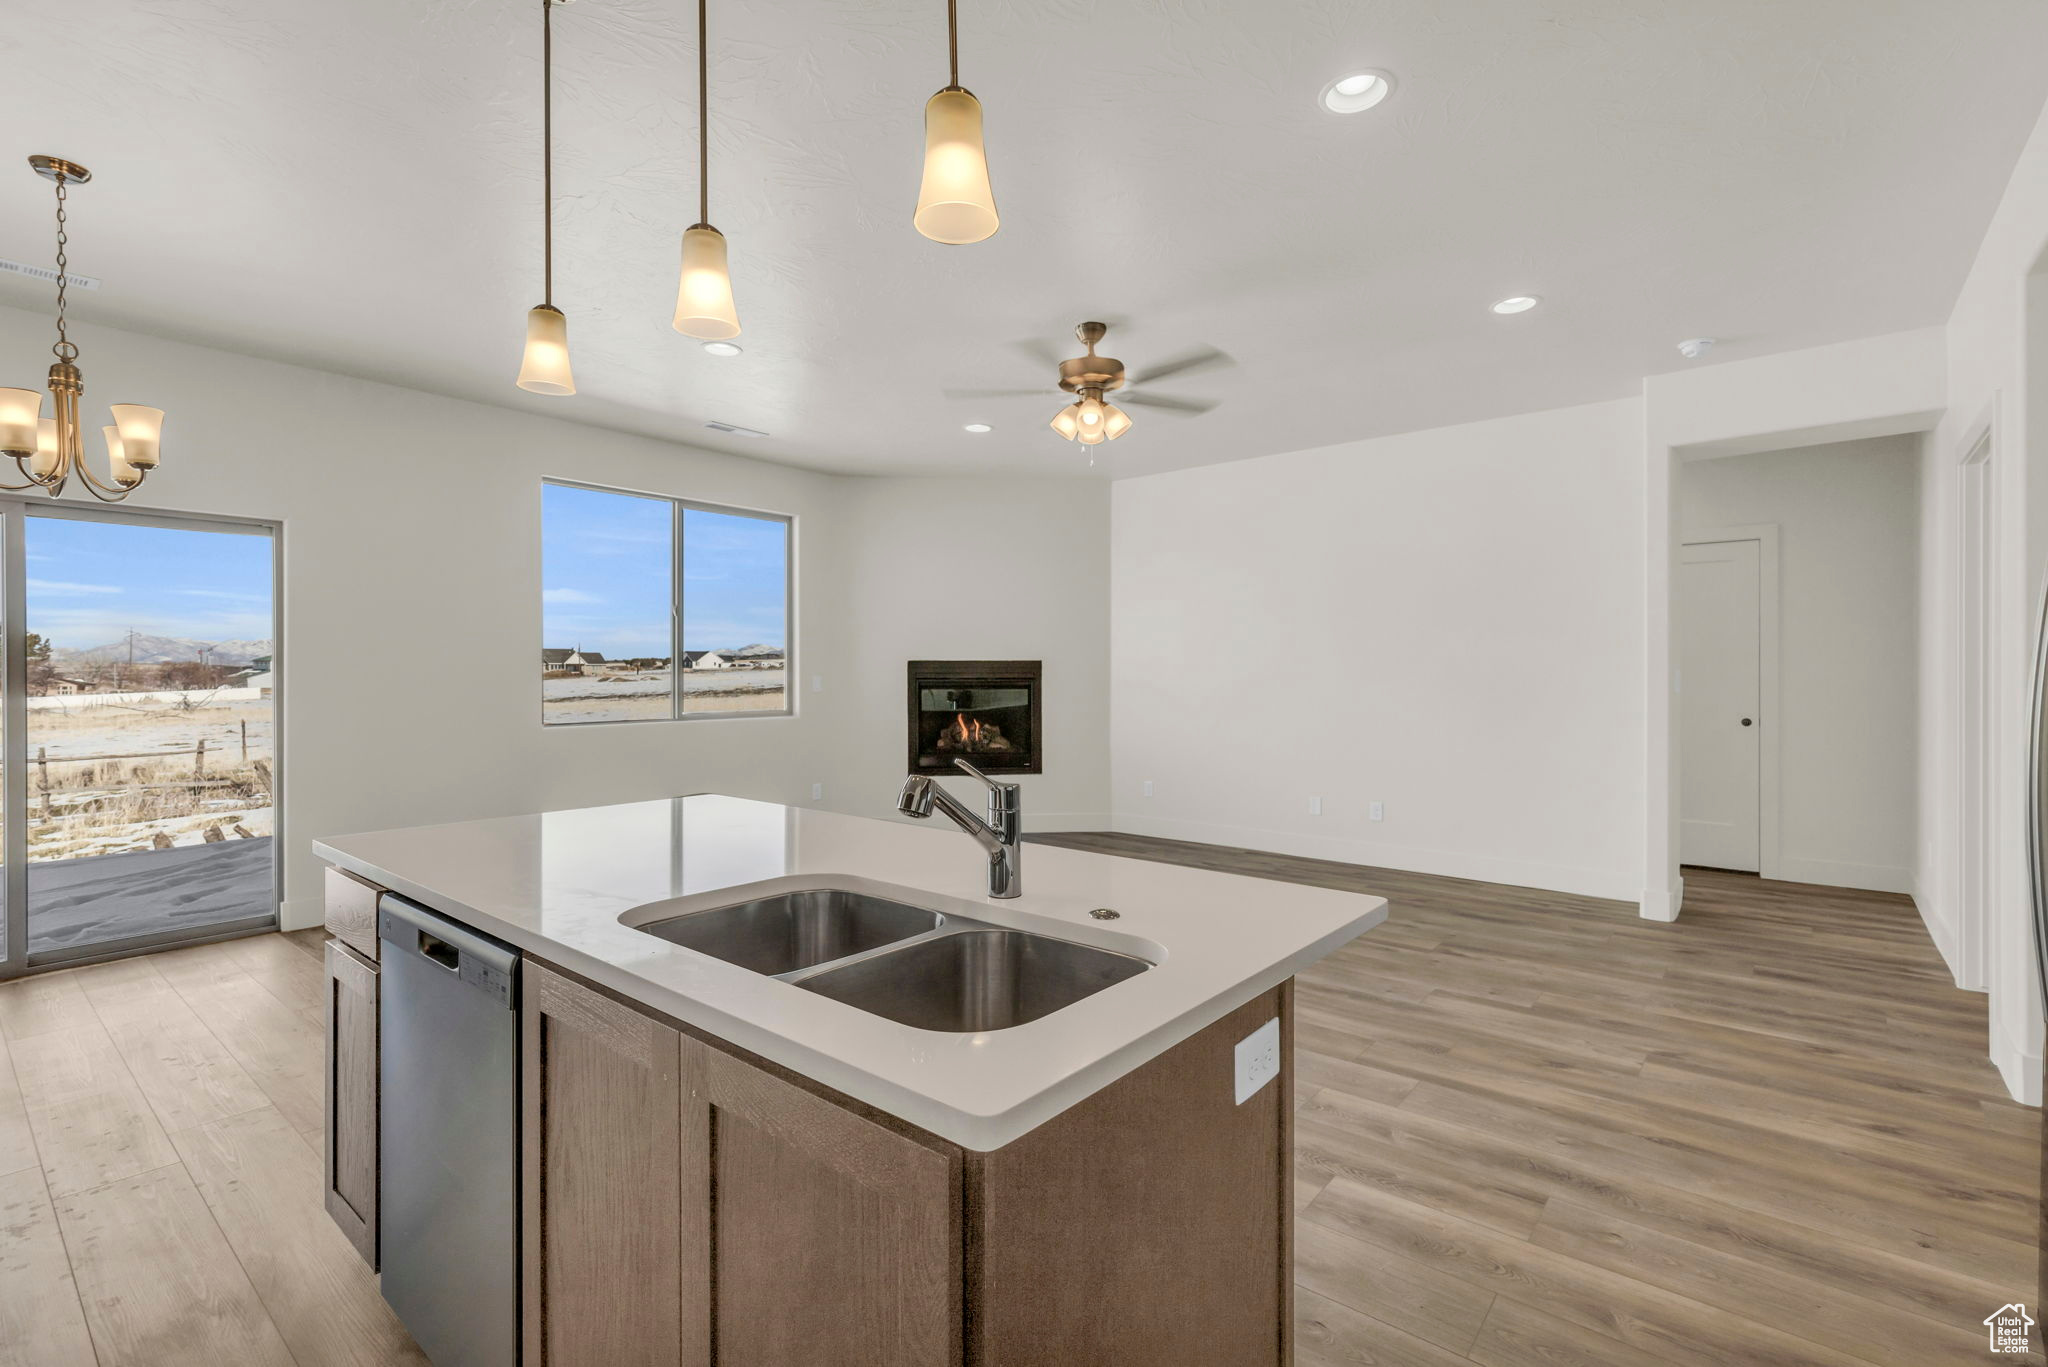 Kitchen featuring light hardwood / wood-style floors, a kitchen island with sink, ceiling fan with notable chandelier, sink, and stainless steel dishwasher